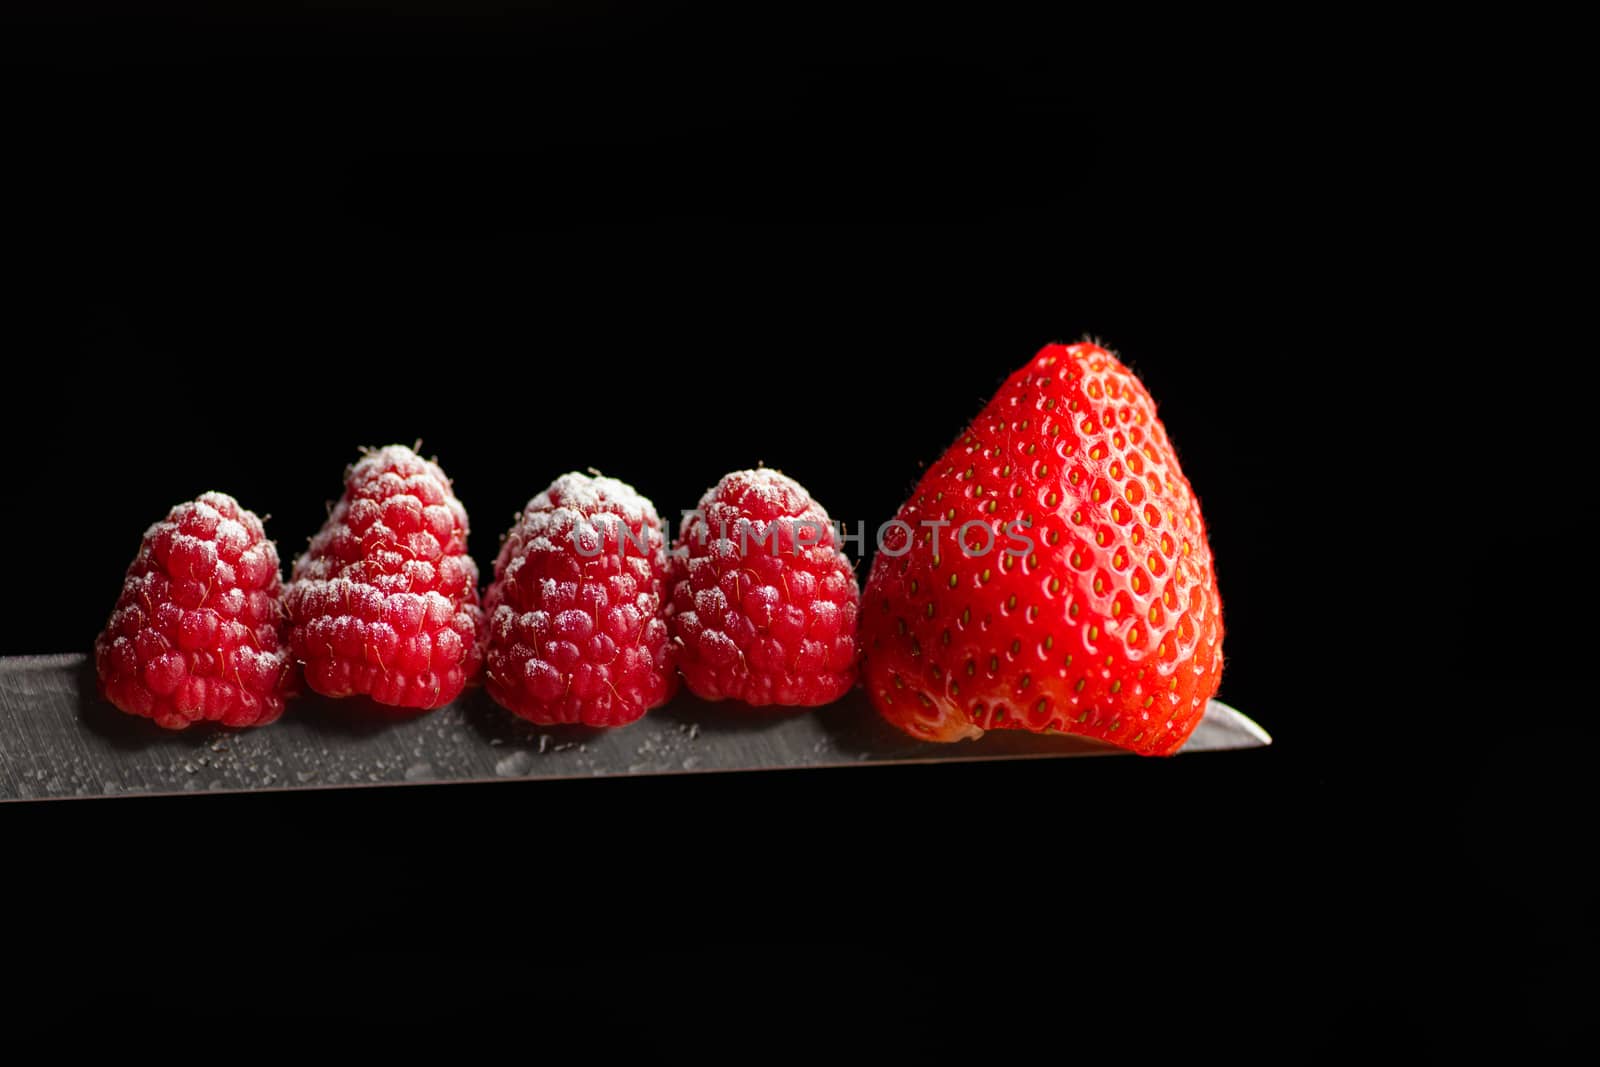 Red Berries balancing on a knife blade with a black background